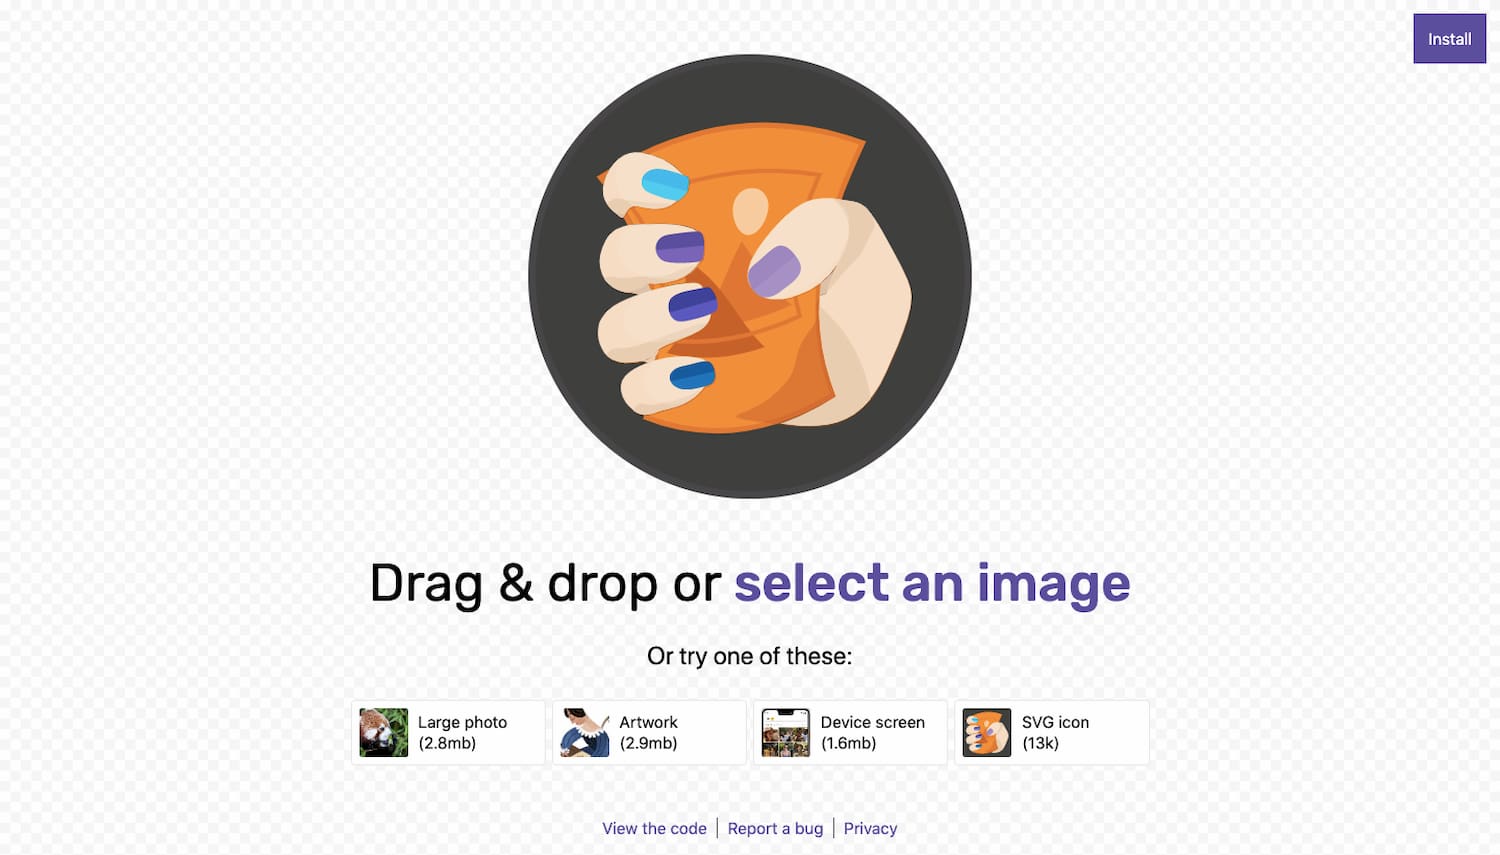 Squoosh app homepage instructs user to drag and drop or select an image to compress